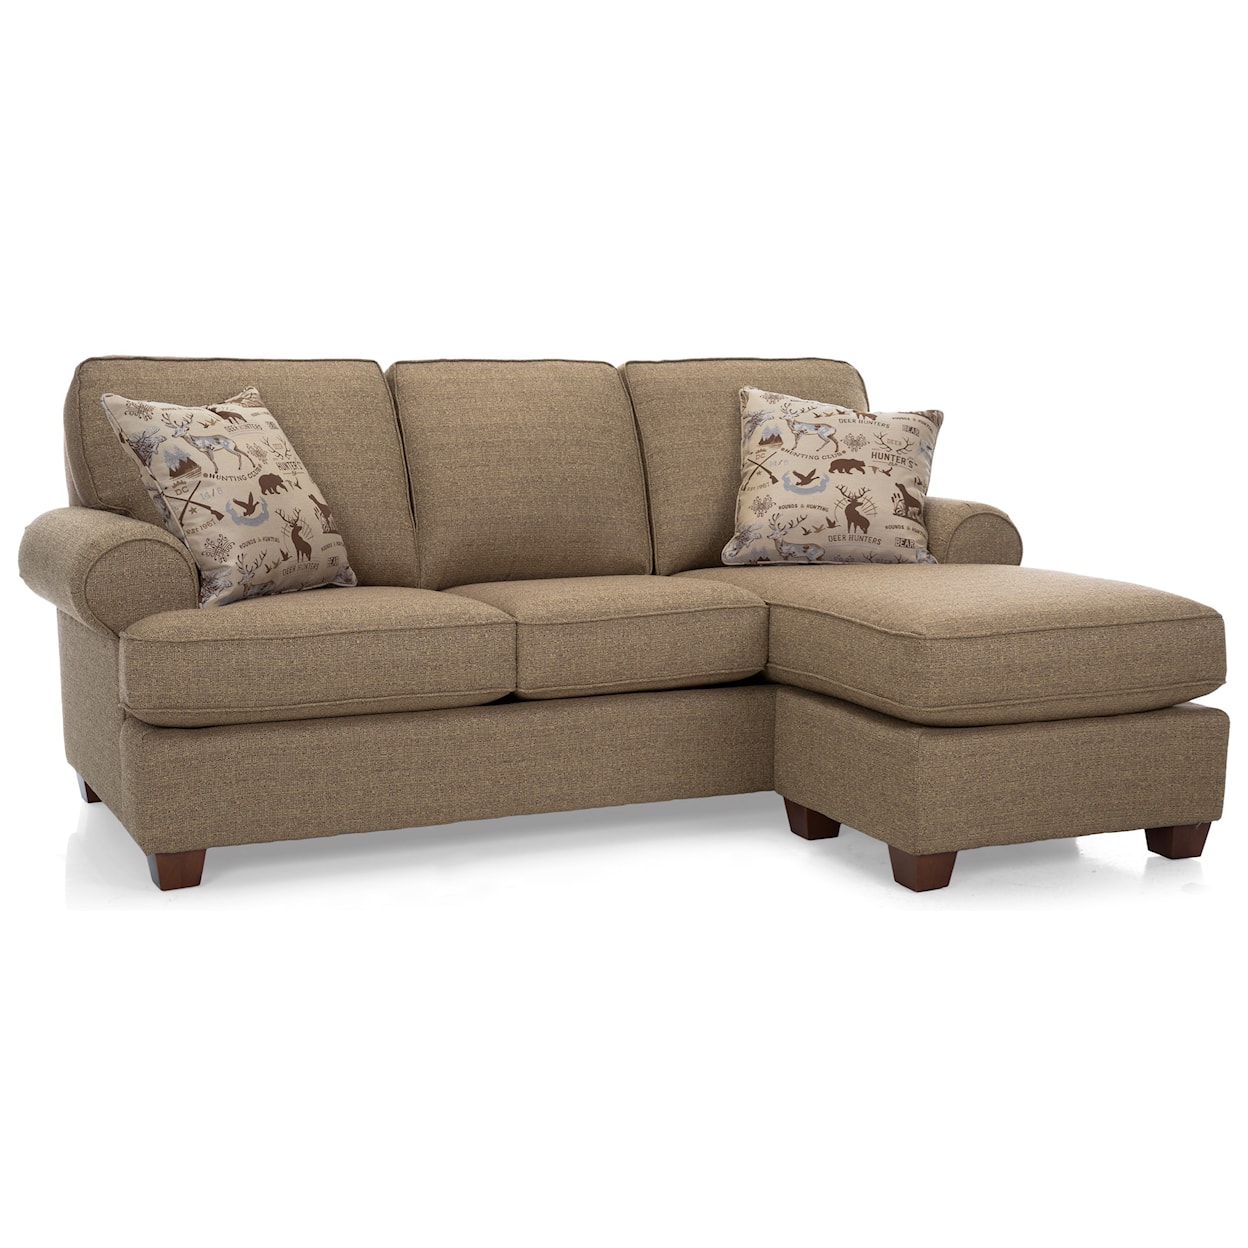 Decor-Rest 2285 Sofa with Chaise